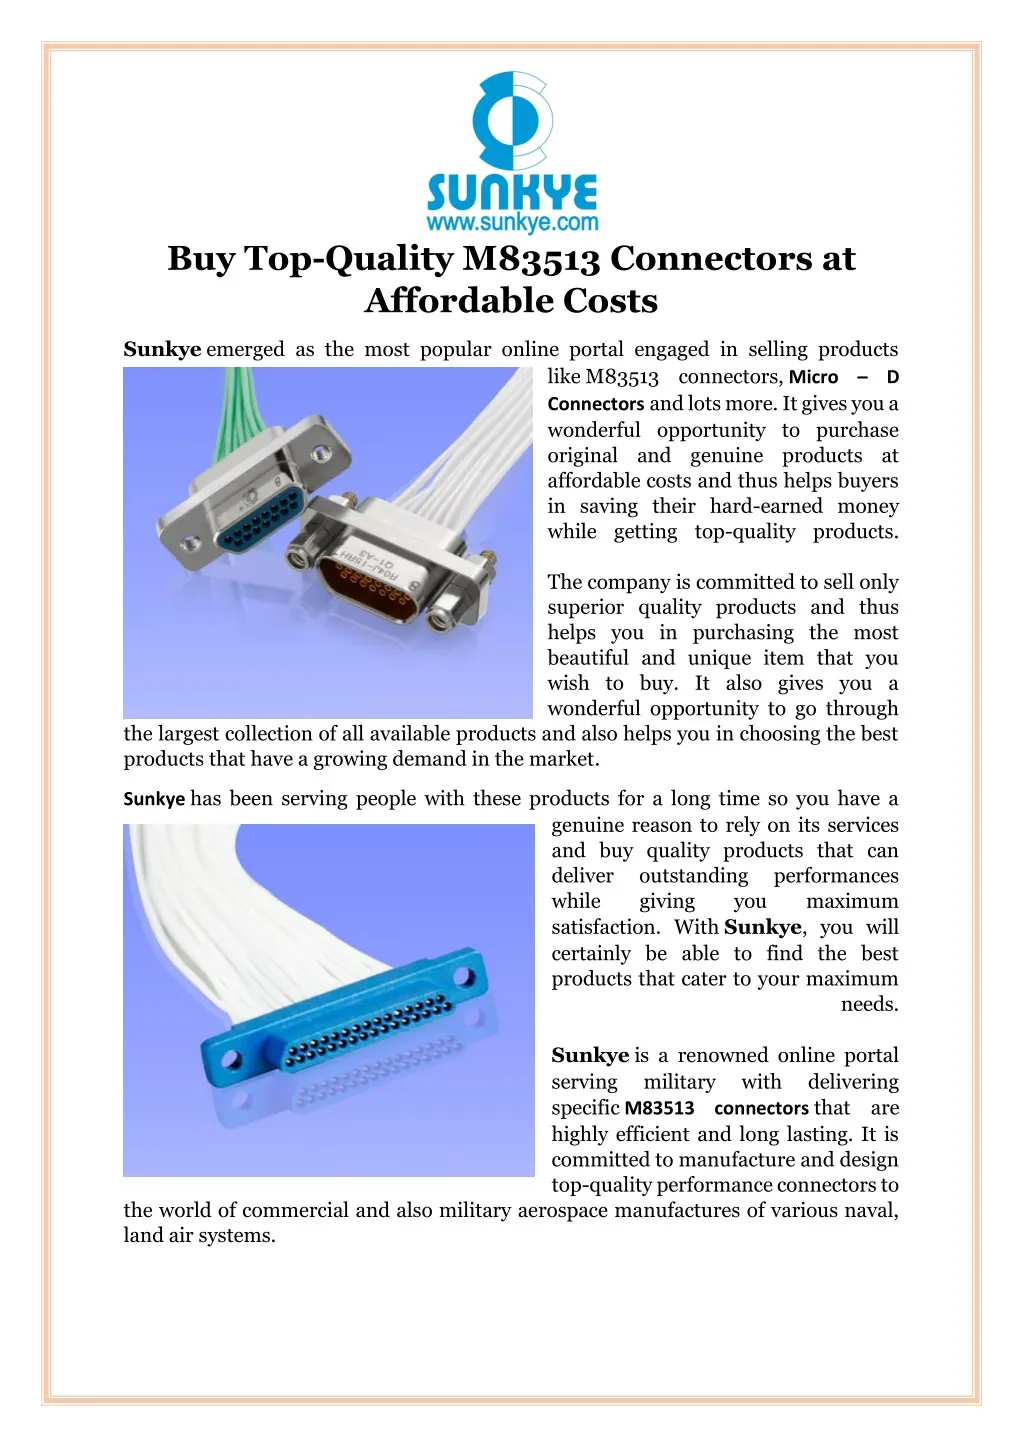 buy top quality m83513 connectors at affordable